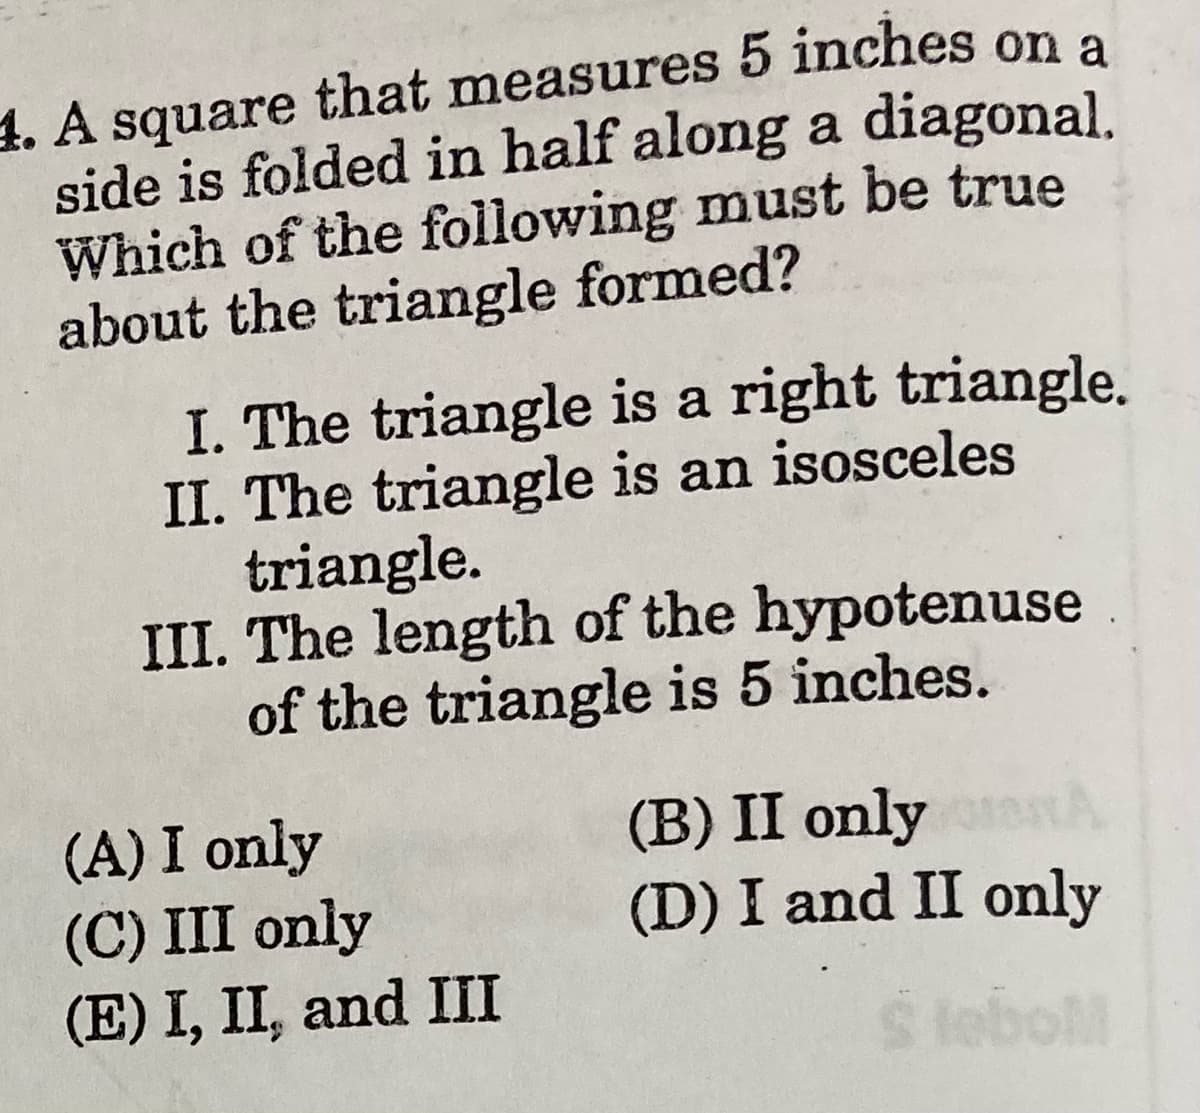 1. A square that measures 5 inches on a
side is folded in half along a diagonal.
Which of the following must be true
about the triangle formed?
I. The triangle is a right triangle.
II. The triangle is an isosceles
triangle.
III. The length of the hypotenuse
of the triangle is 5 inches.
(A) I only
(C) III only
(E) I, II, and III
(B) II only
(D) I and II only
S lebol
